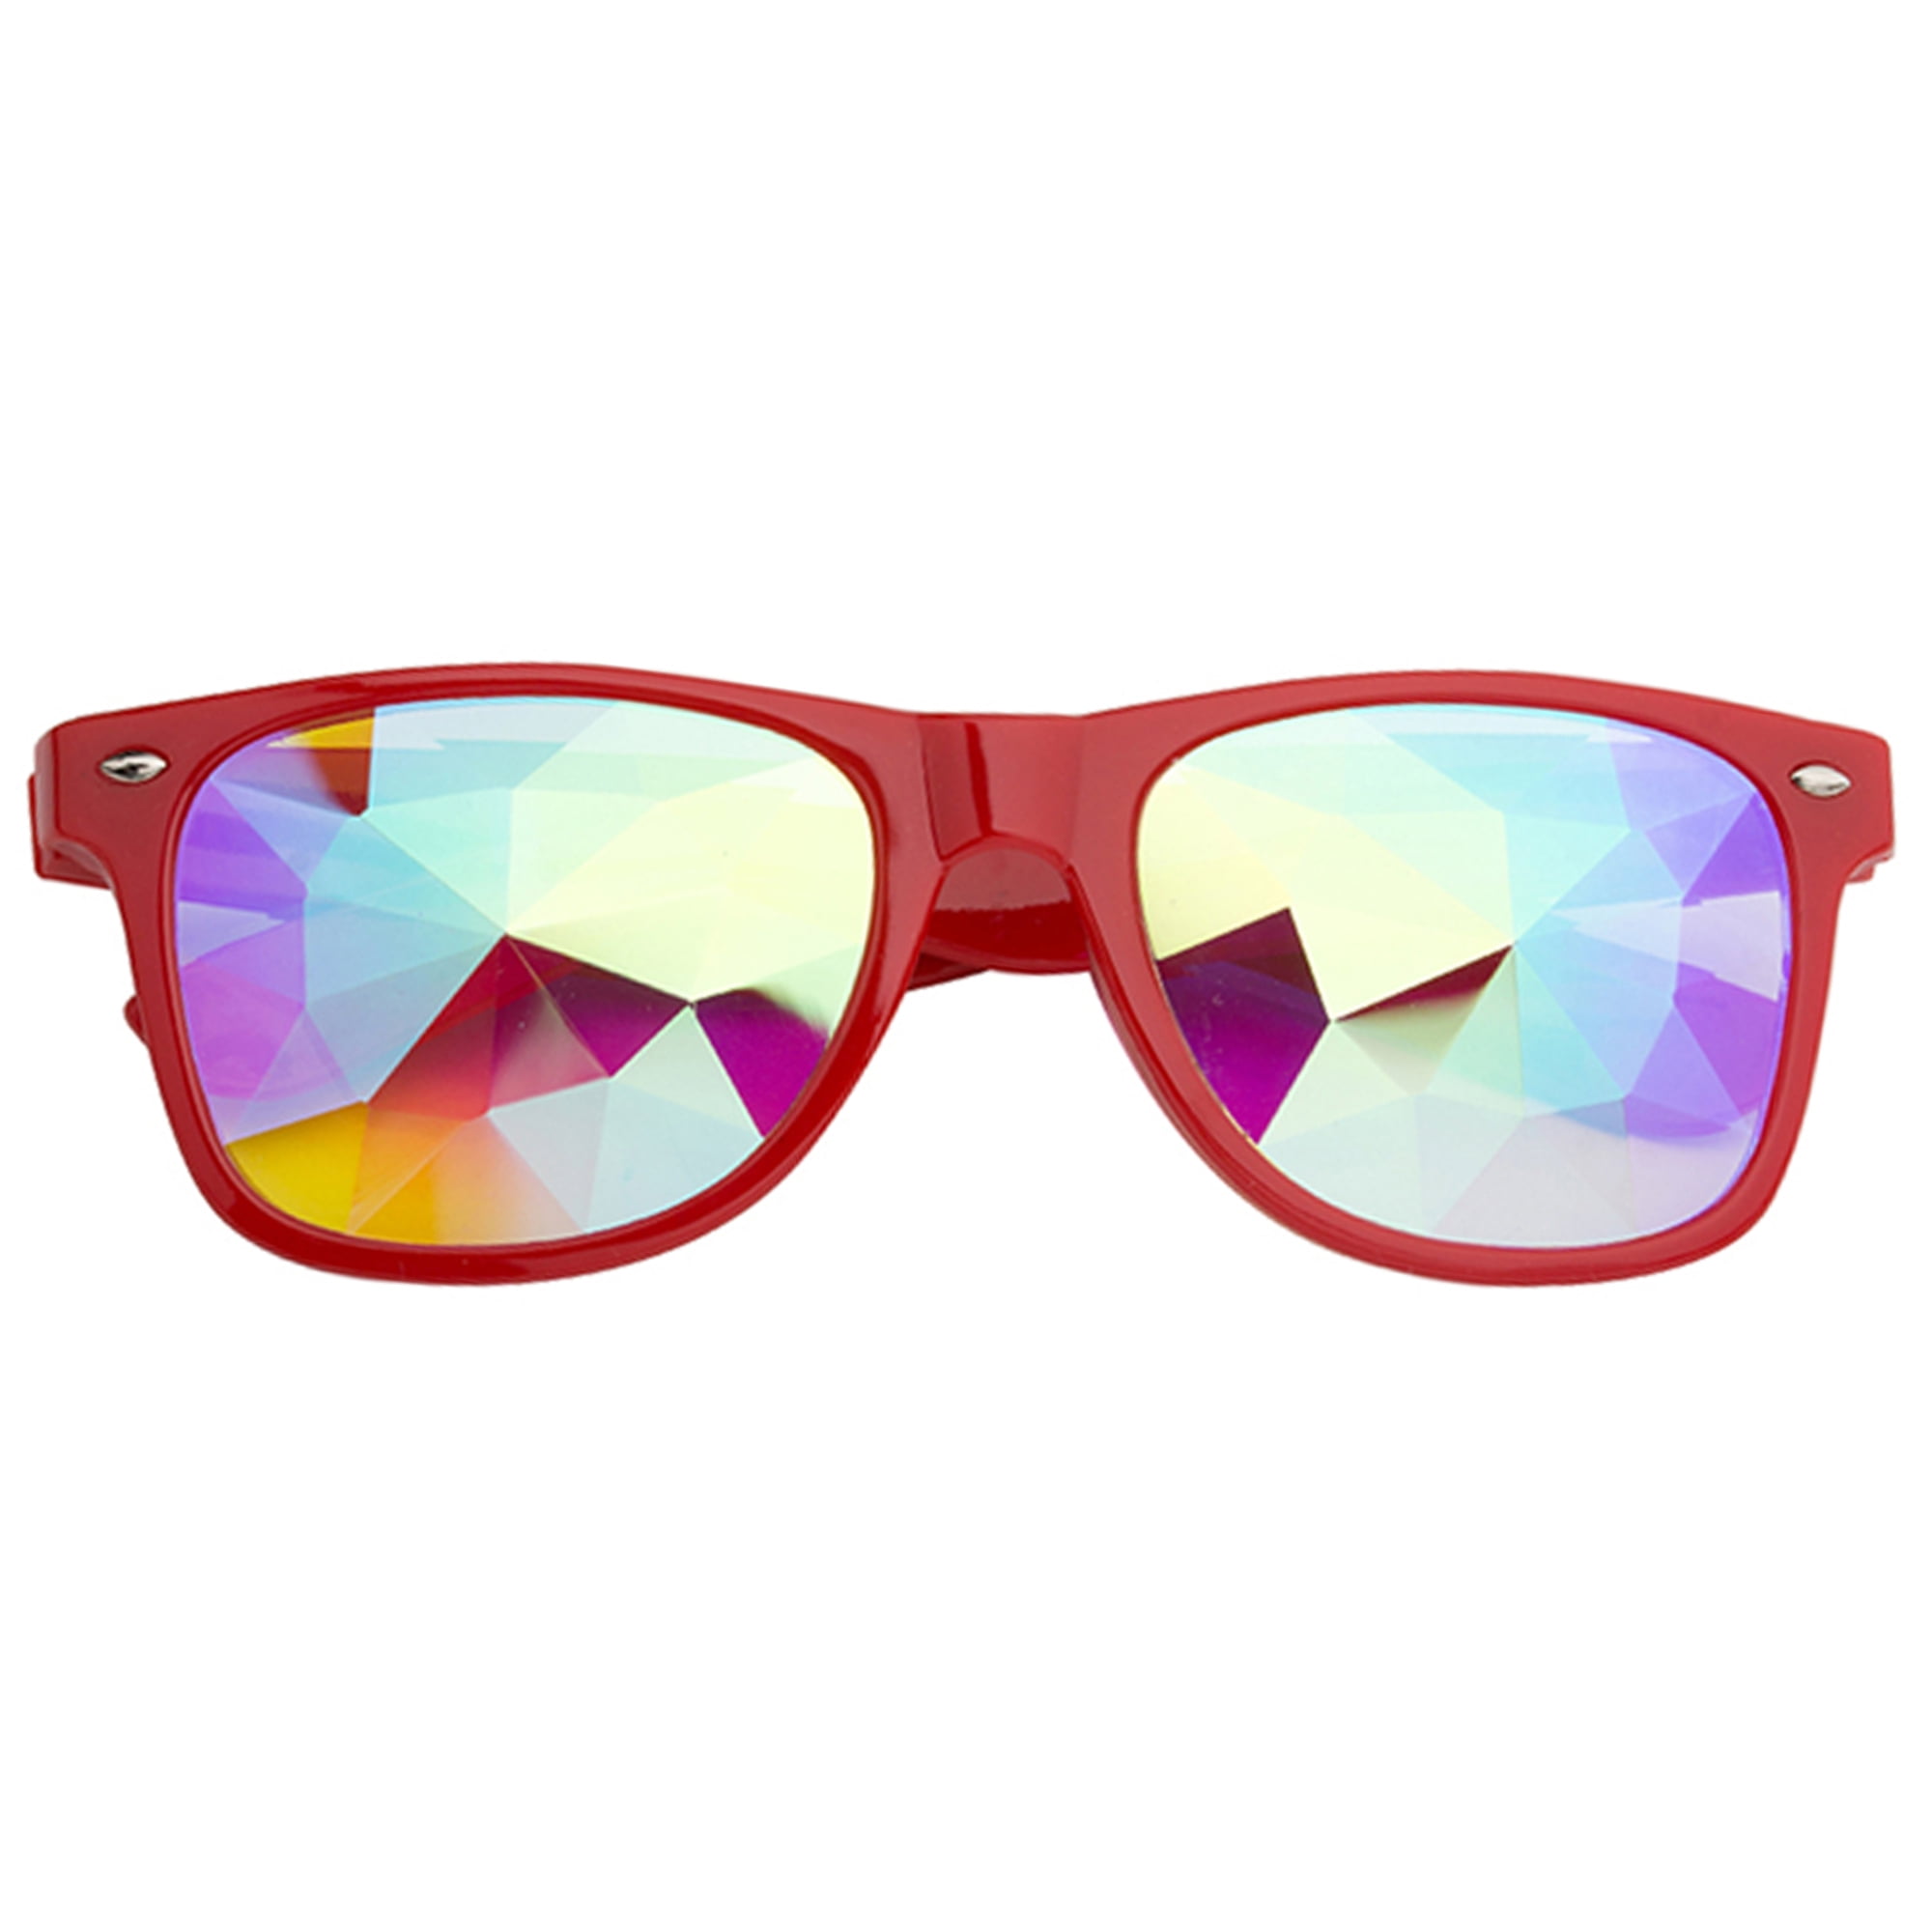 Kaleidoscopic Glasses great w/ Rave Shades prism diffraction lenses effects 